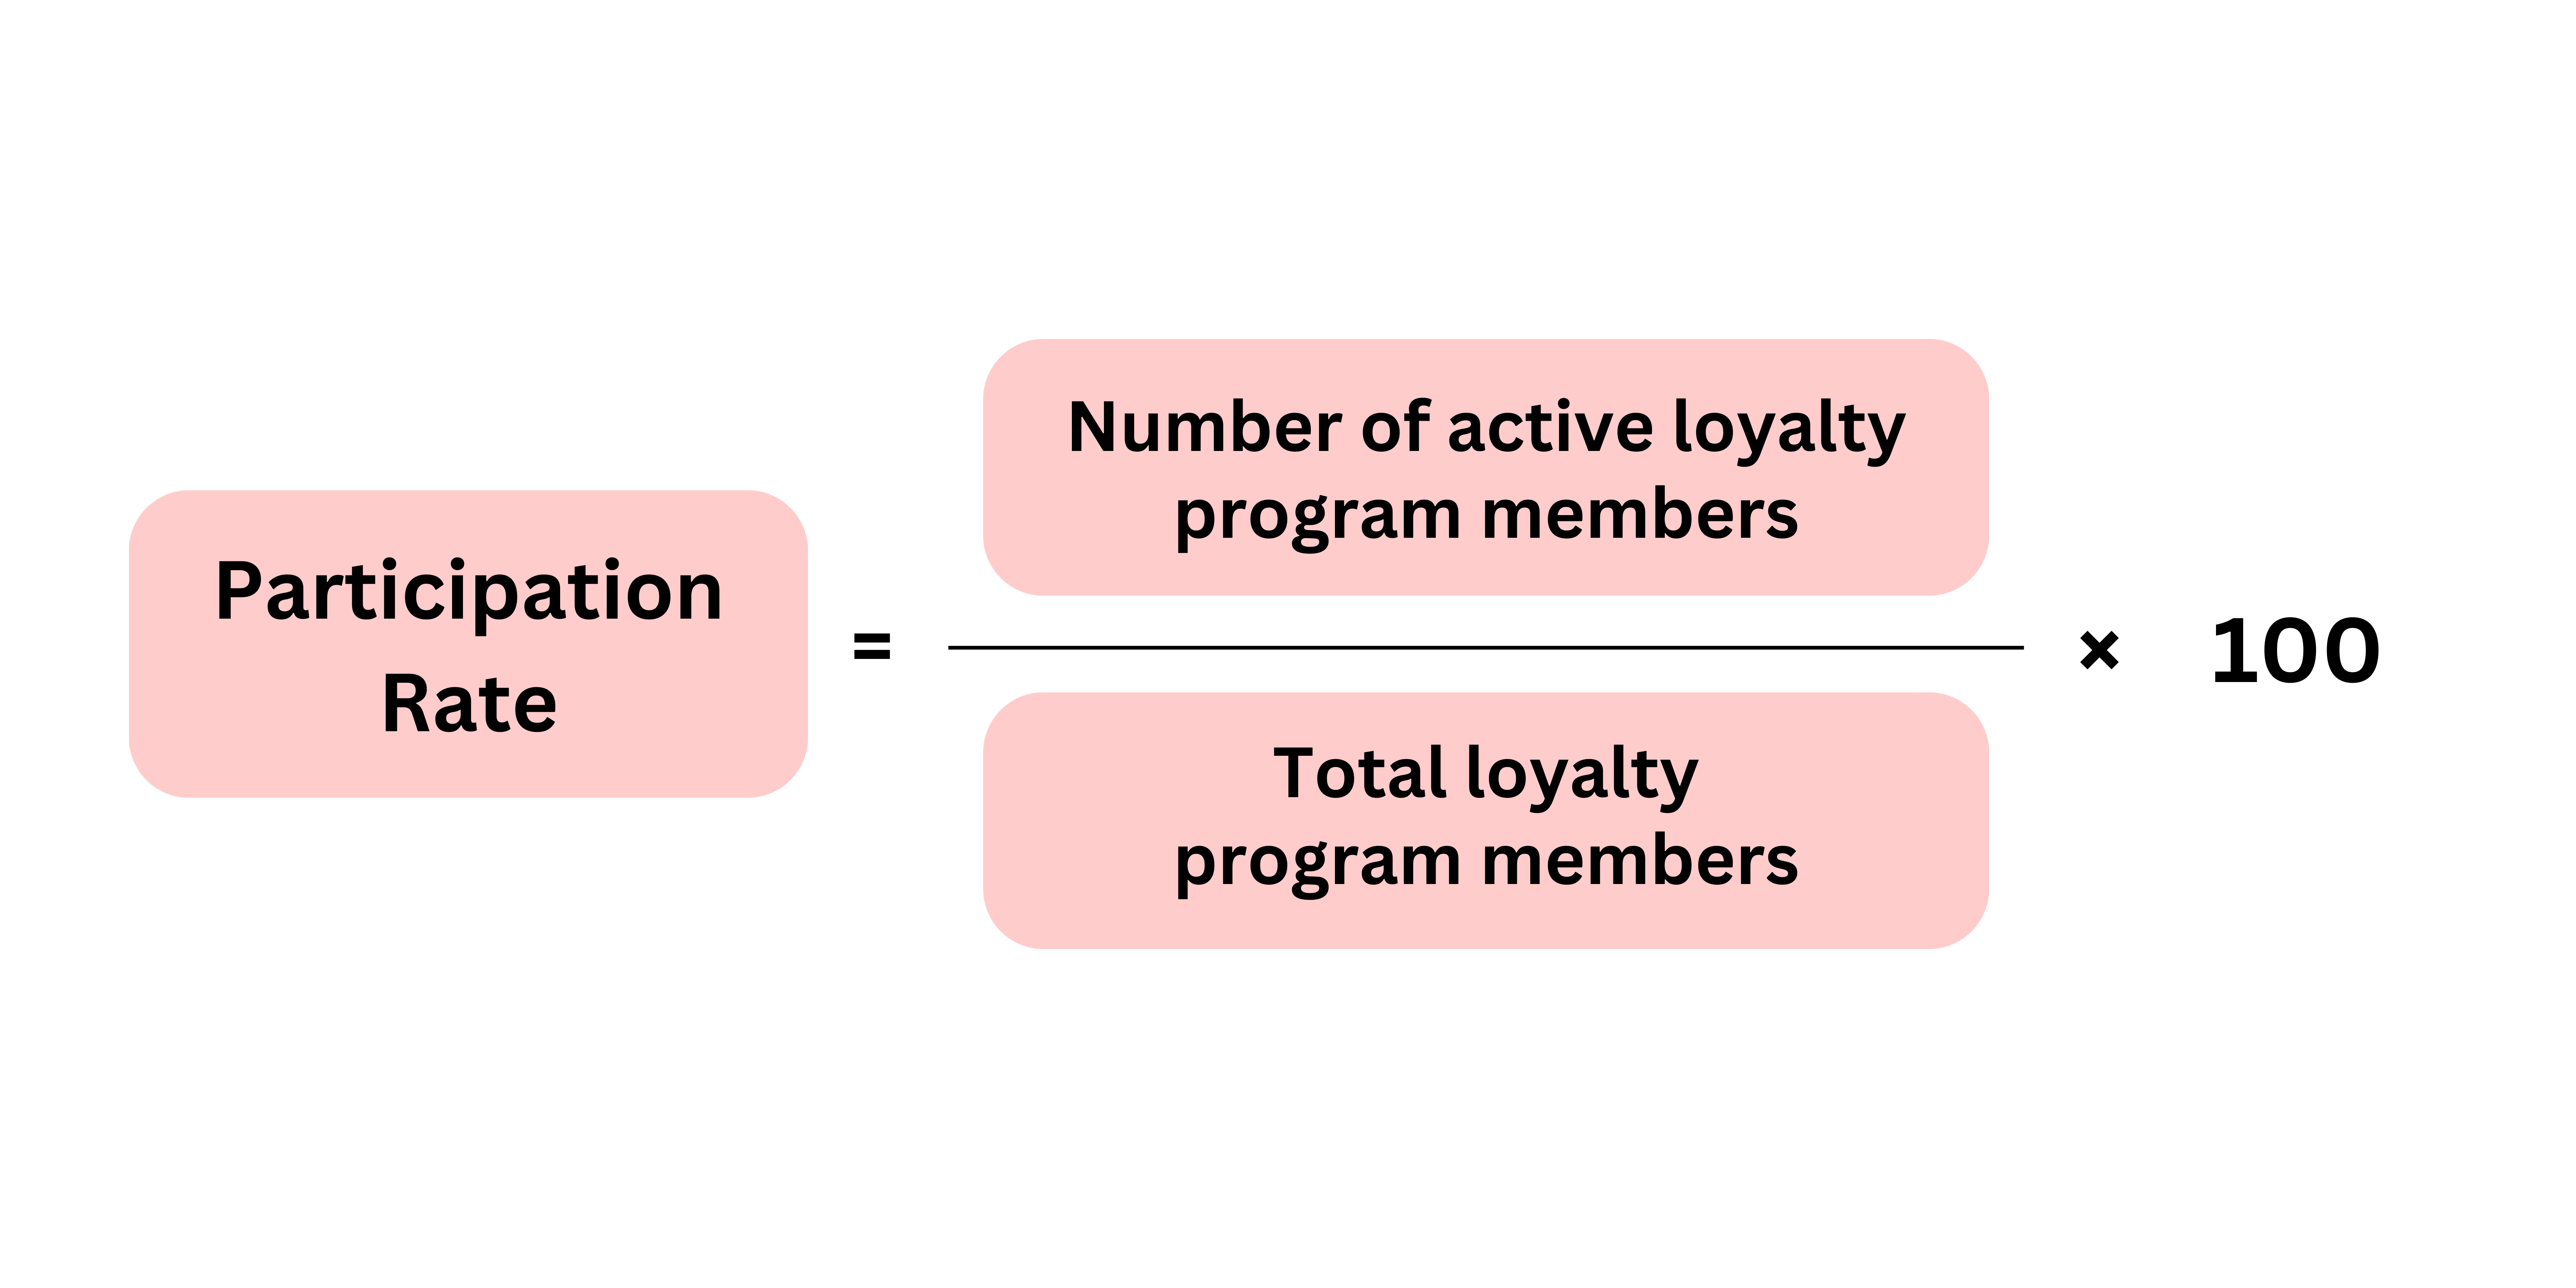 Participation Rate = (Number of active loyalty program members / Total loyalty program members) × 100